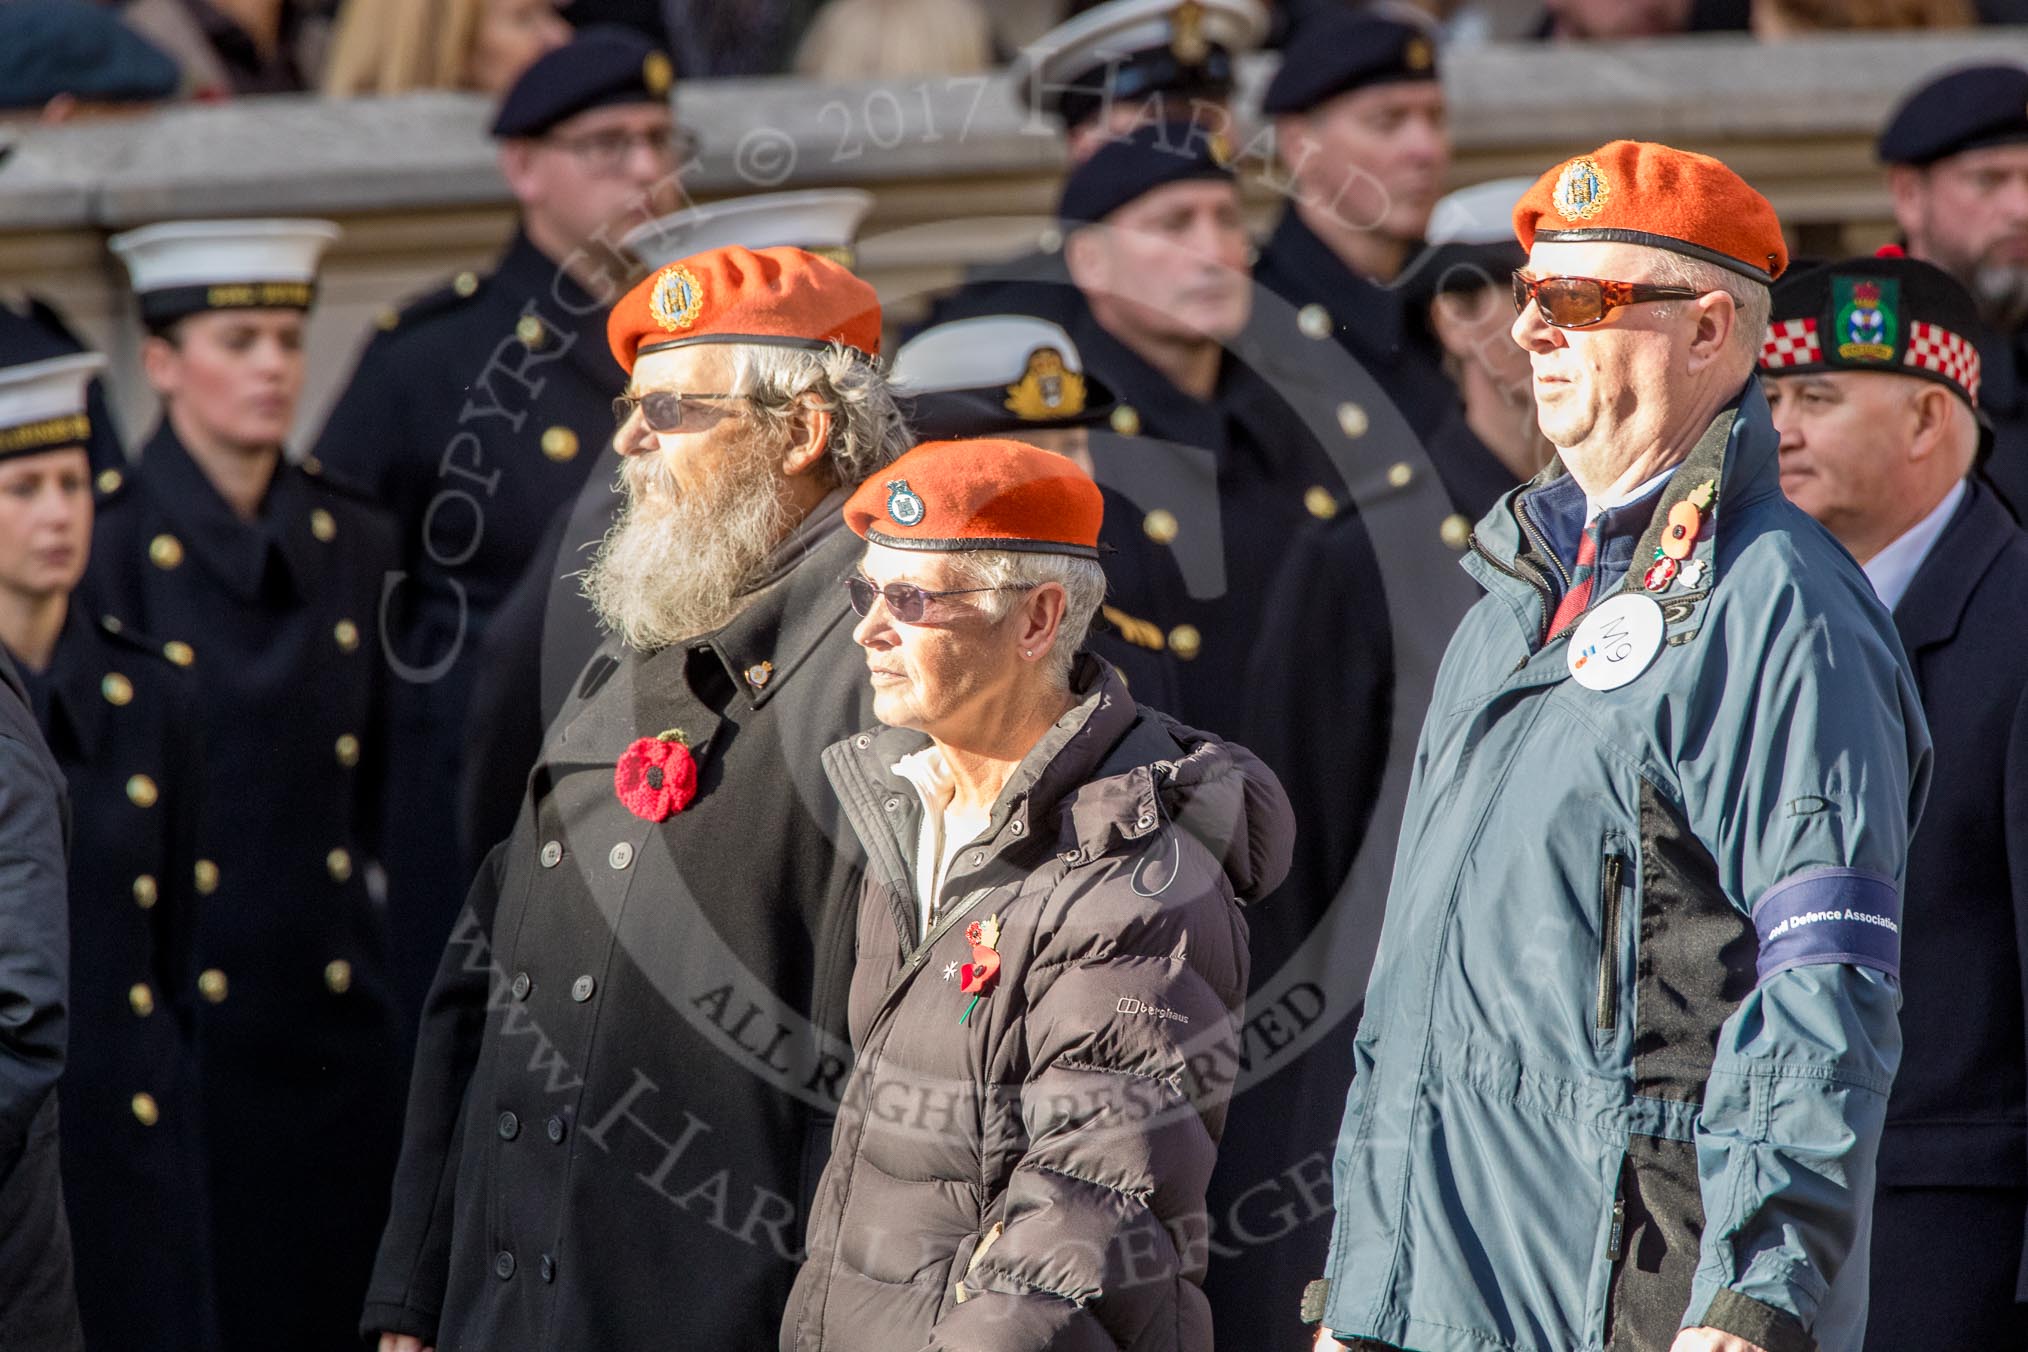 Civil Defence Association  M9, 12 members)  during the Royal British Legion March Past on Remembrance Sunday at the Cenotaph, Whitehall, Westminster, London, 11 November 2018, 12:26.